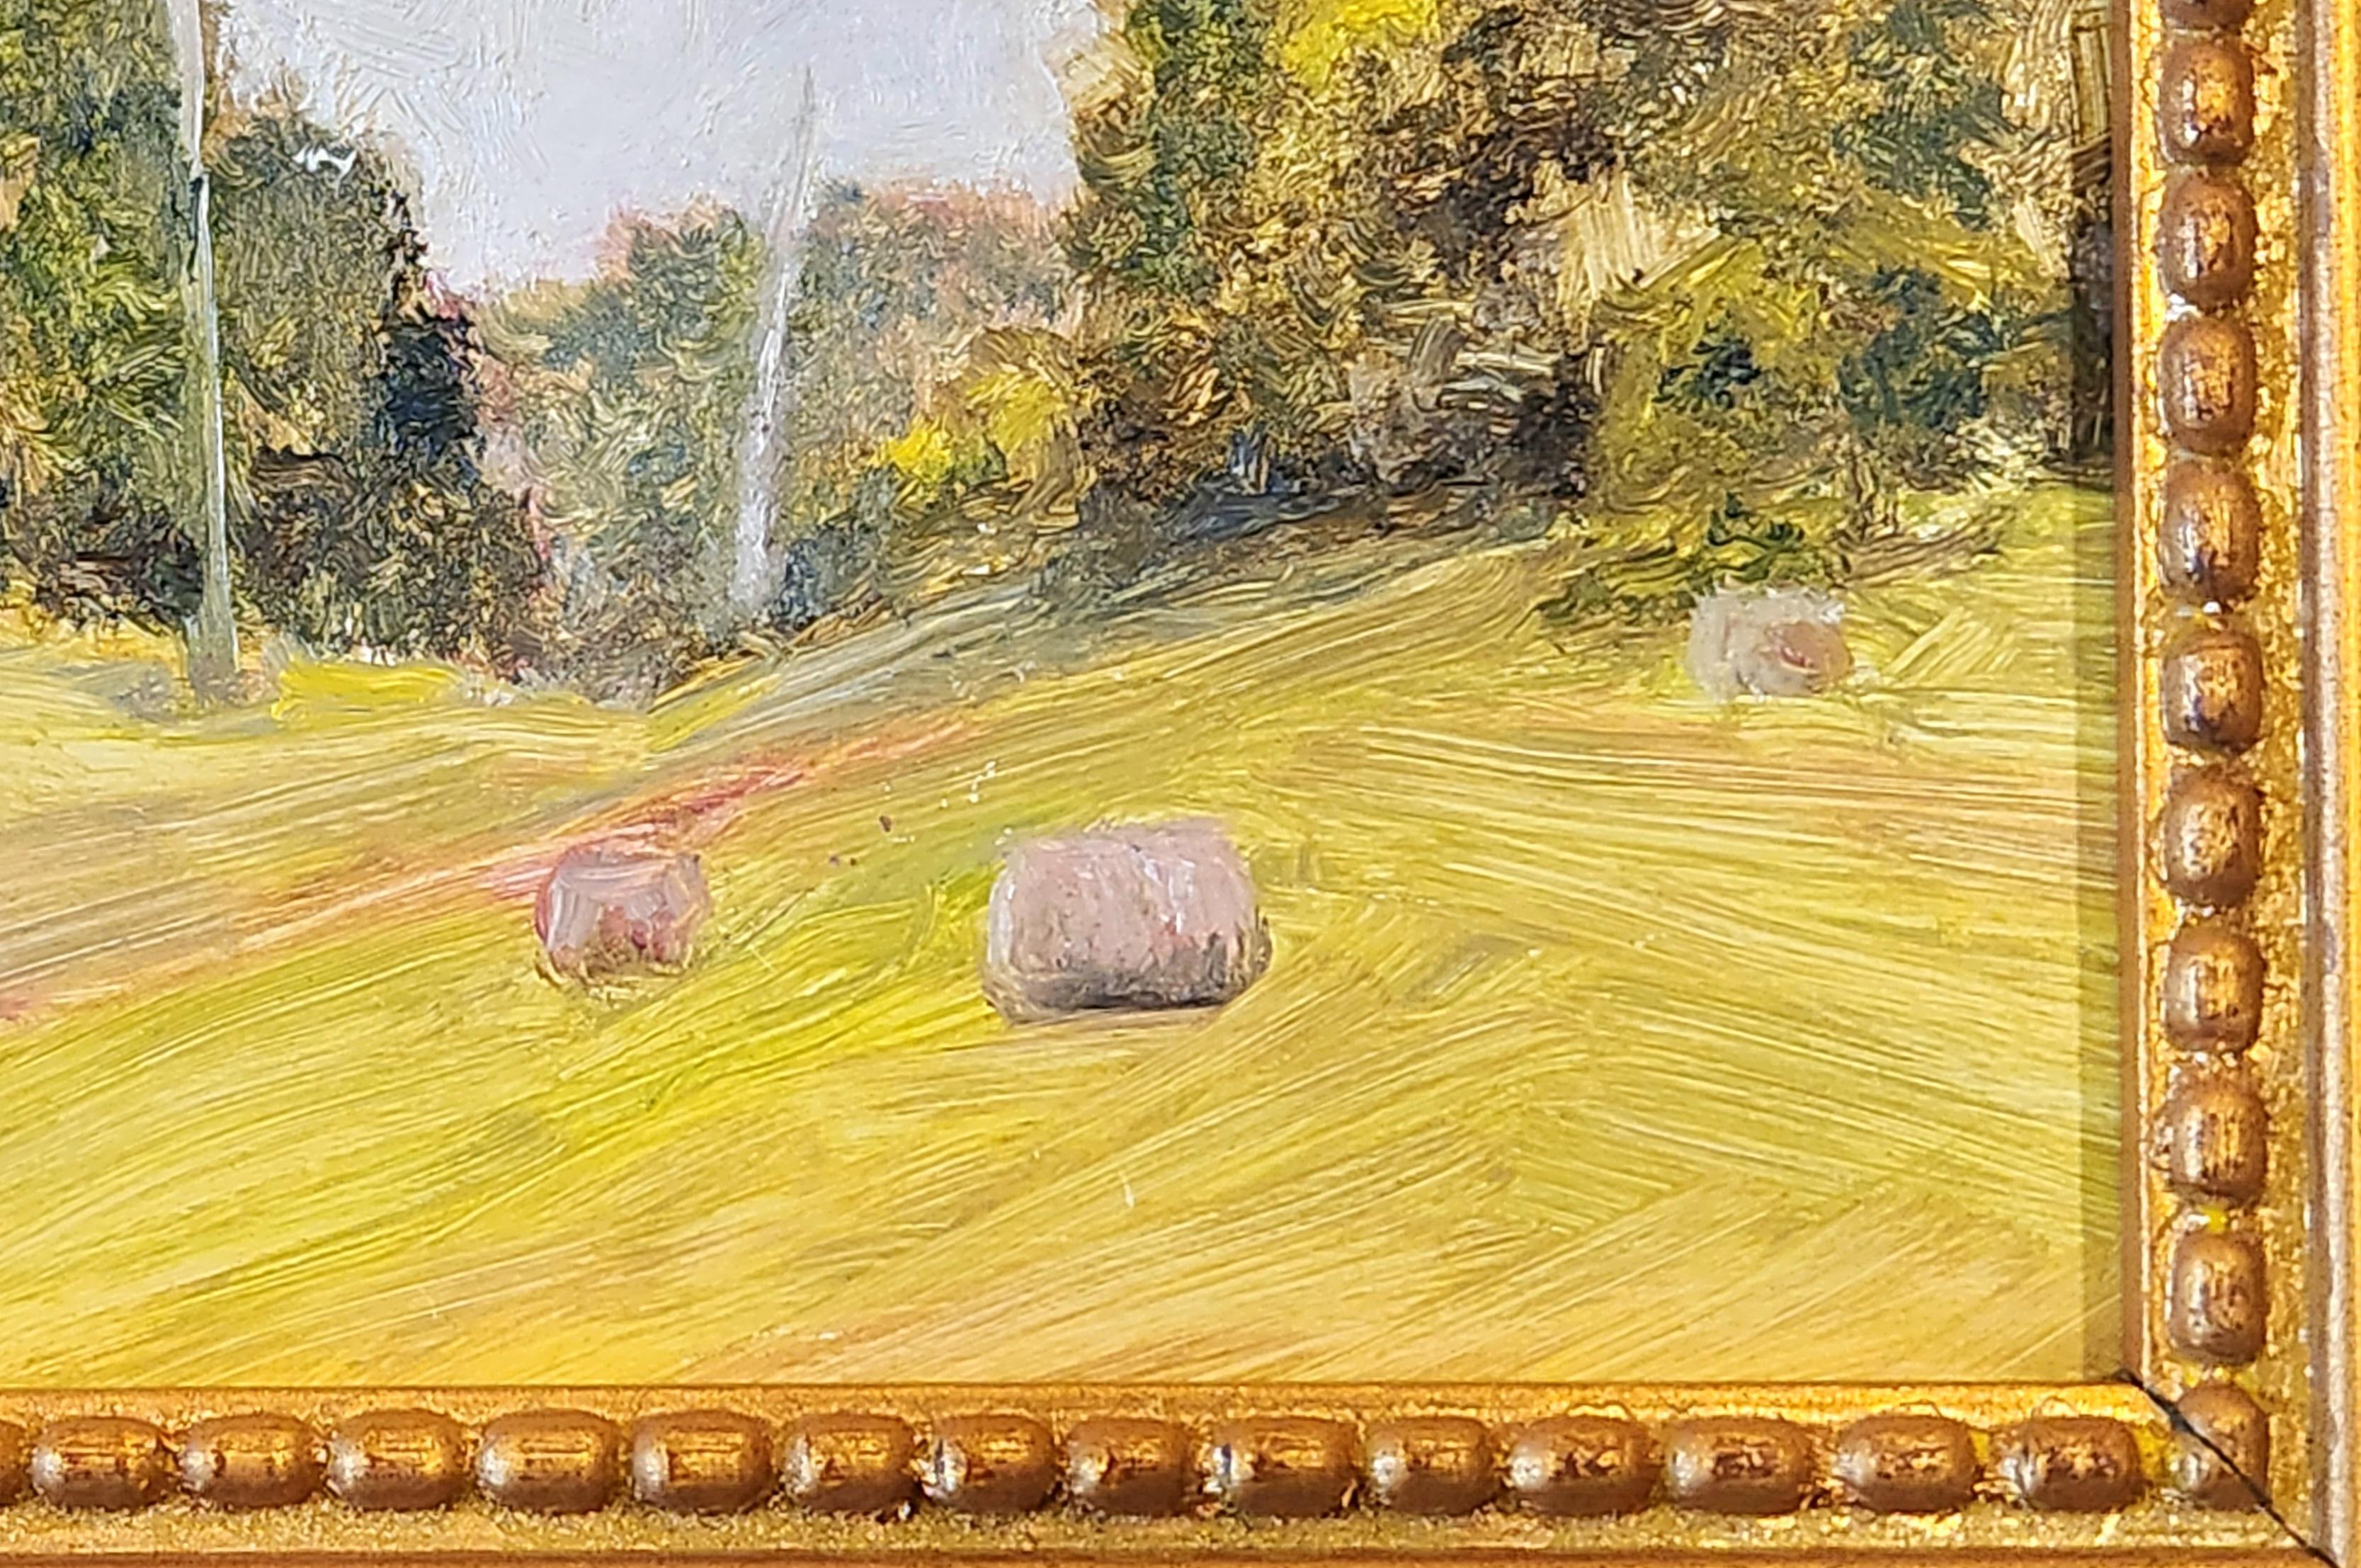 Oil on Canvas Painting.-- Wapner's Hay Bales 2